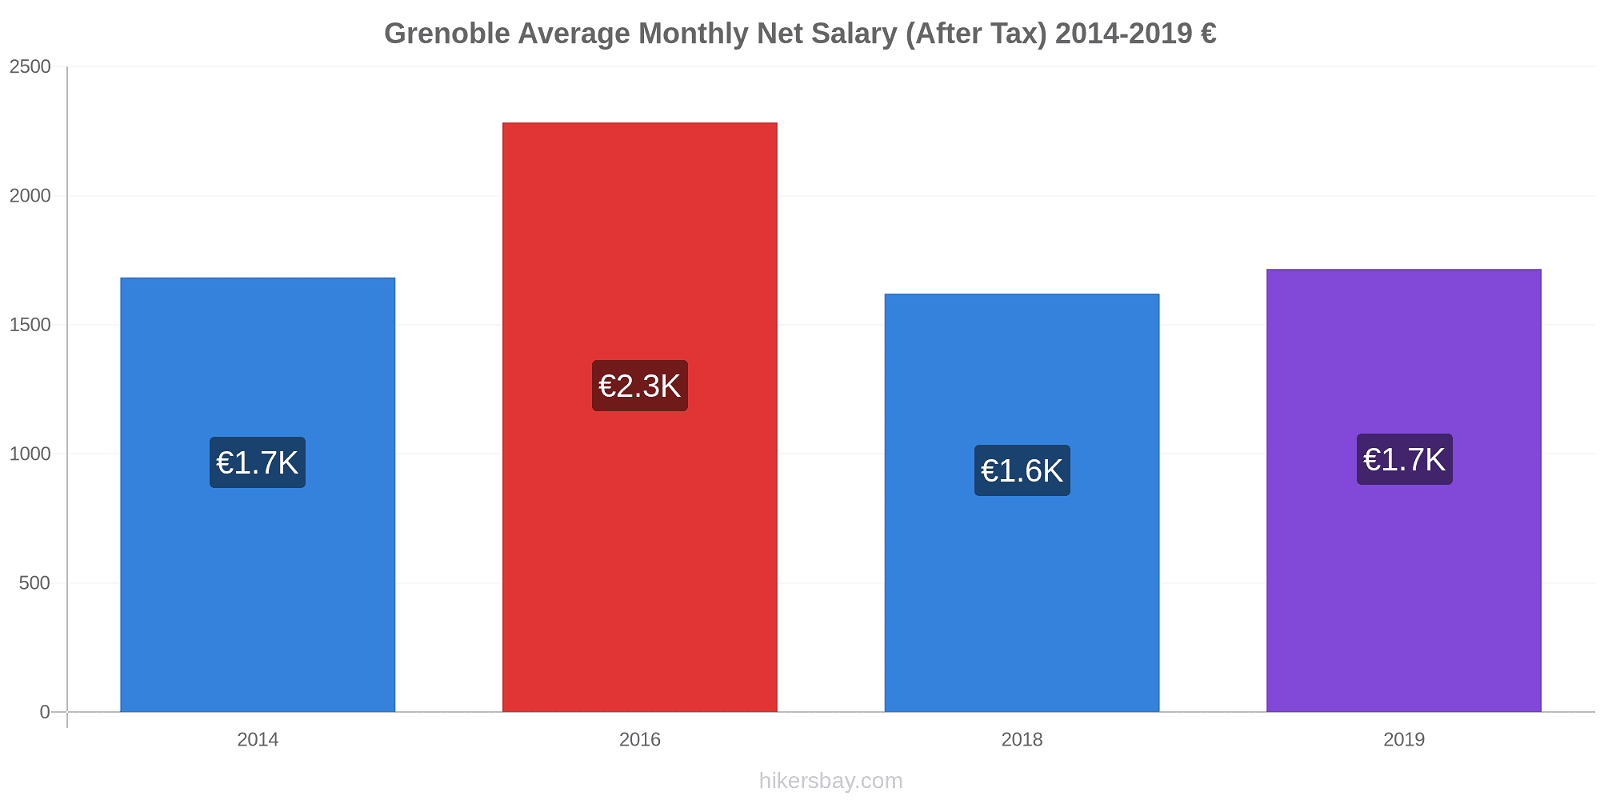 Grenoble price changes Average Monthly Net Salary (After Tax) hikersbay.com